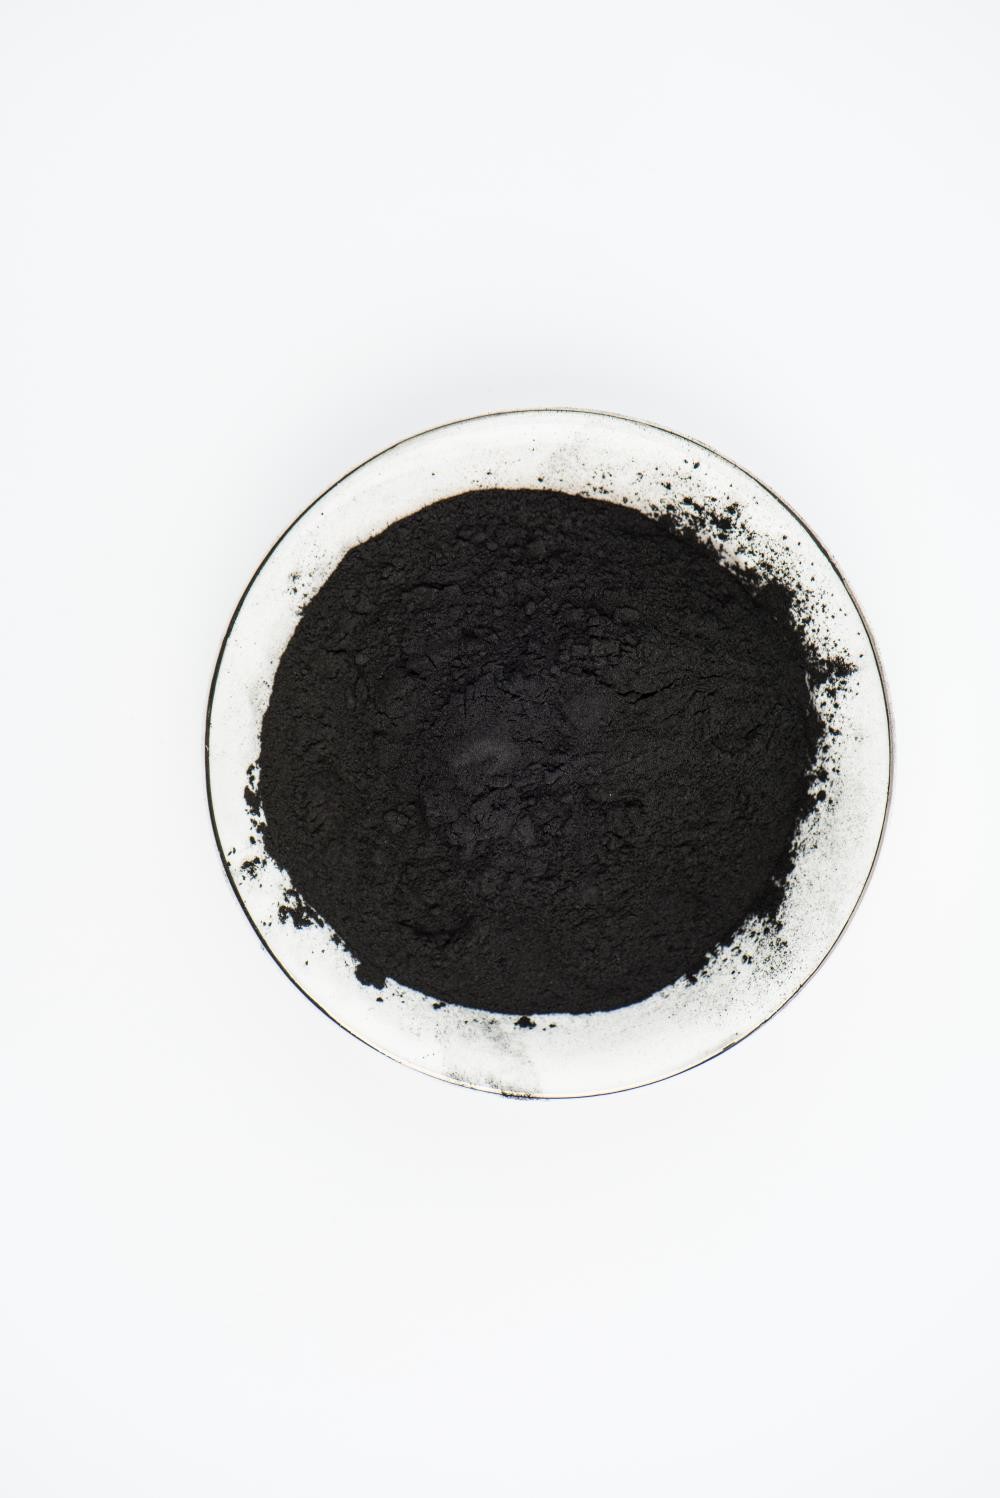 Quality Gentamycin Wood Based Activated Carbon , High Purity Activated Black Charcoal for sale